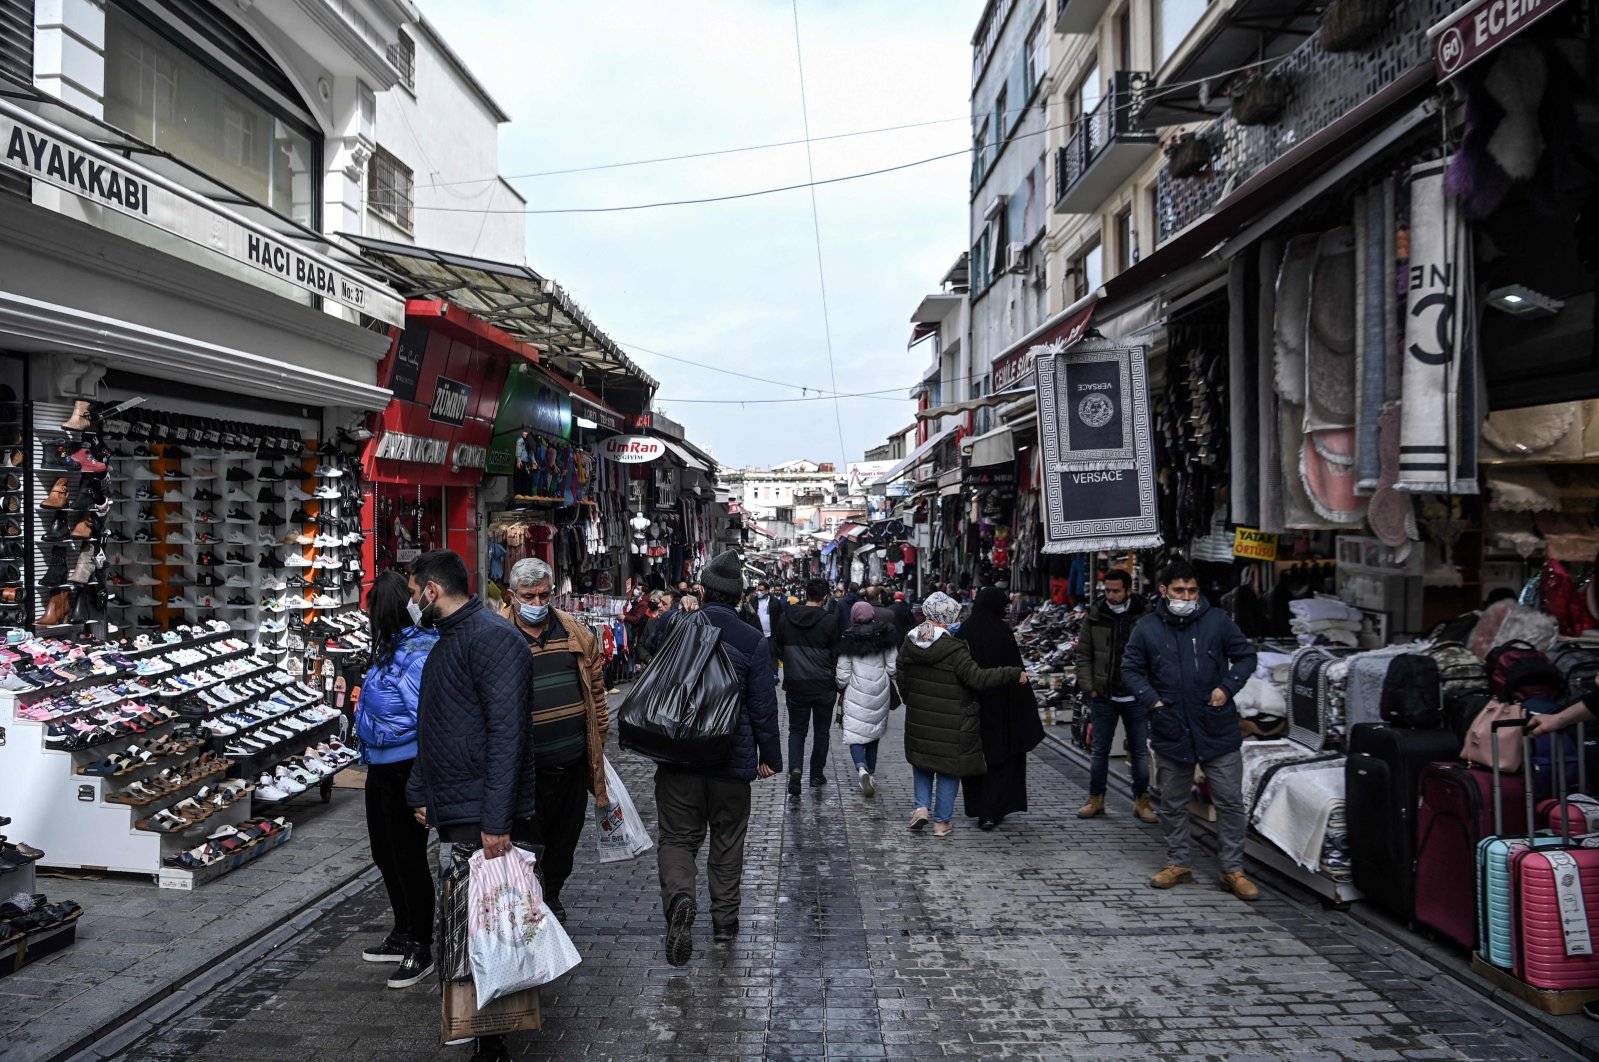 Pedestrians and customers walk past shops in the Mahmutpaşa neighborhood in Istanbul, Turkey, March 22, 2021. (AFP Photo)